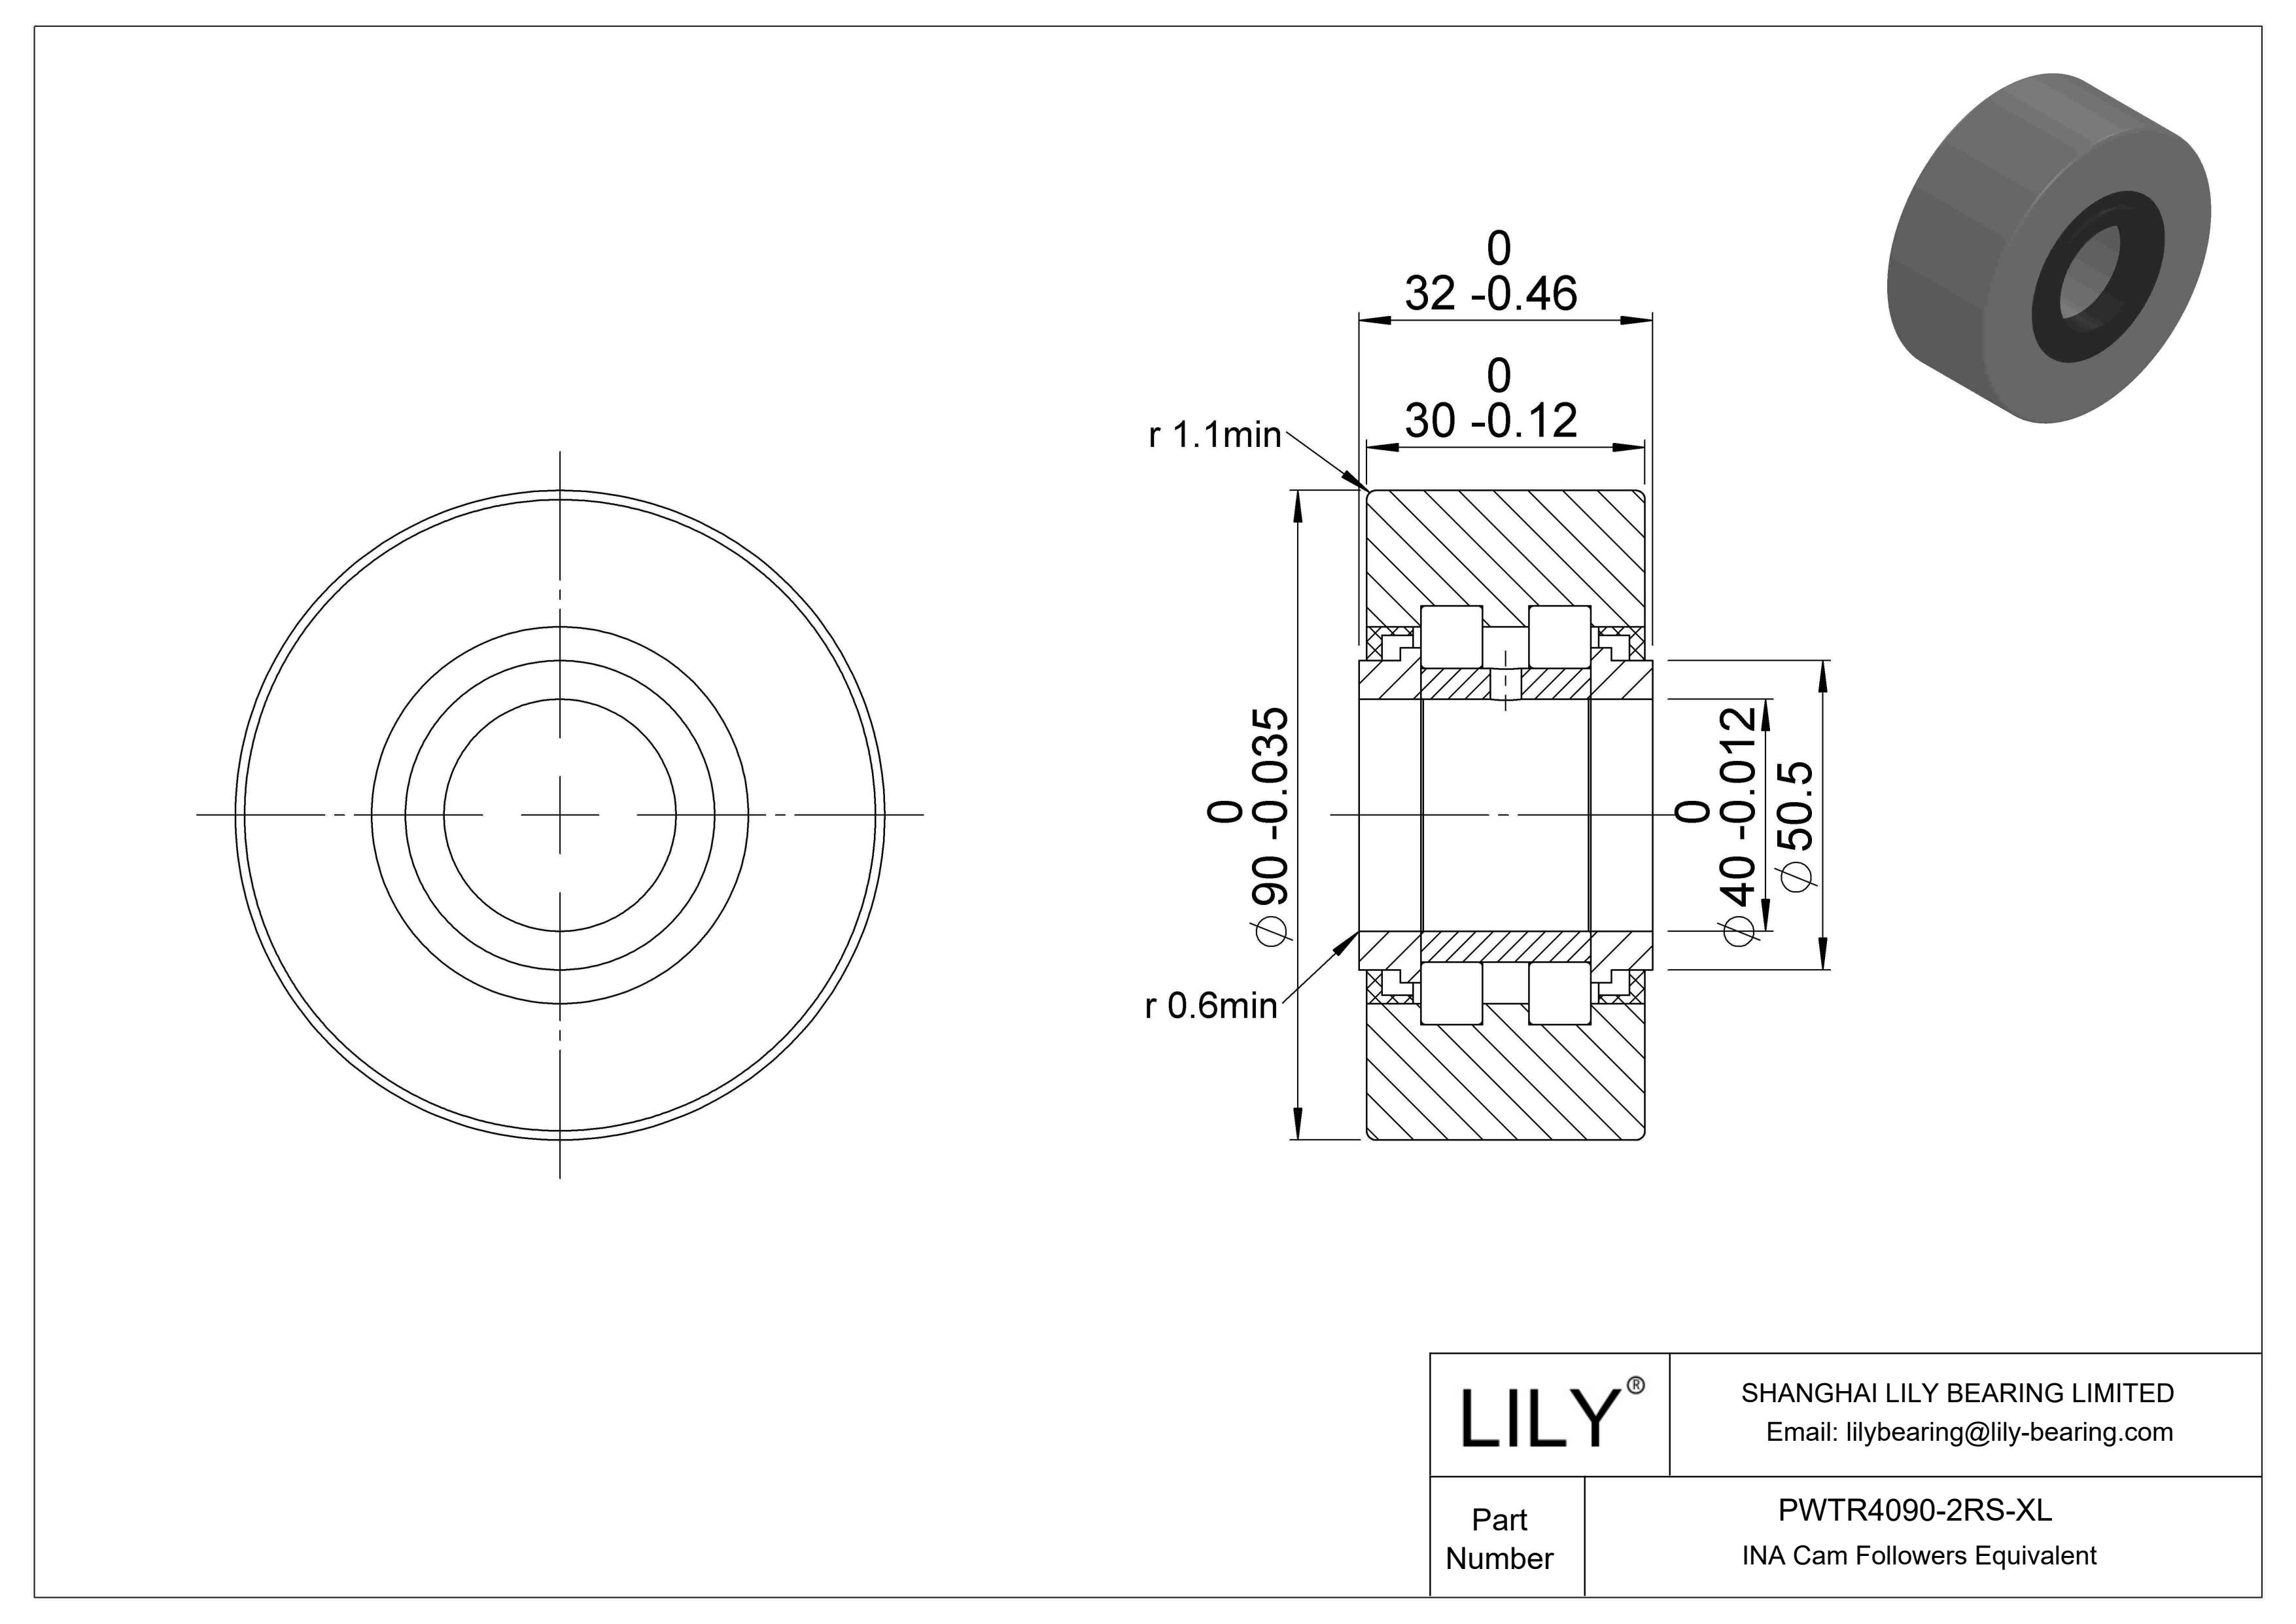 PWTR4090-2RS-XL Yoke Type Track Rollers cad drawing